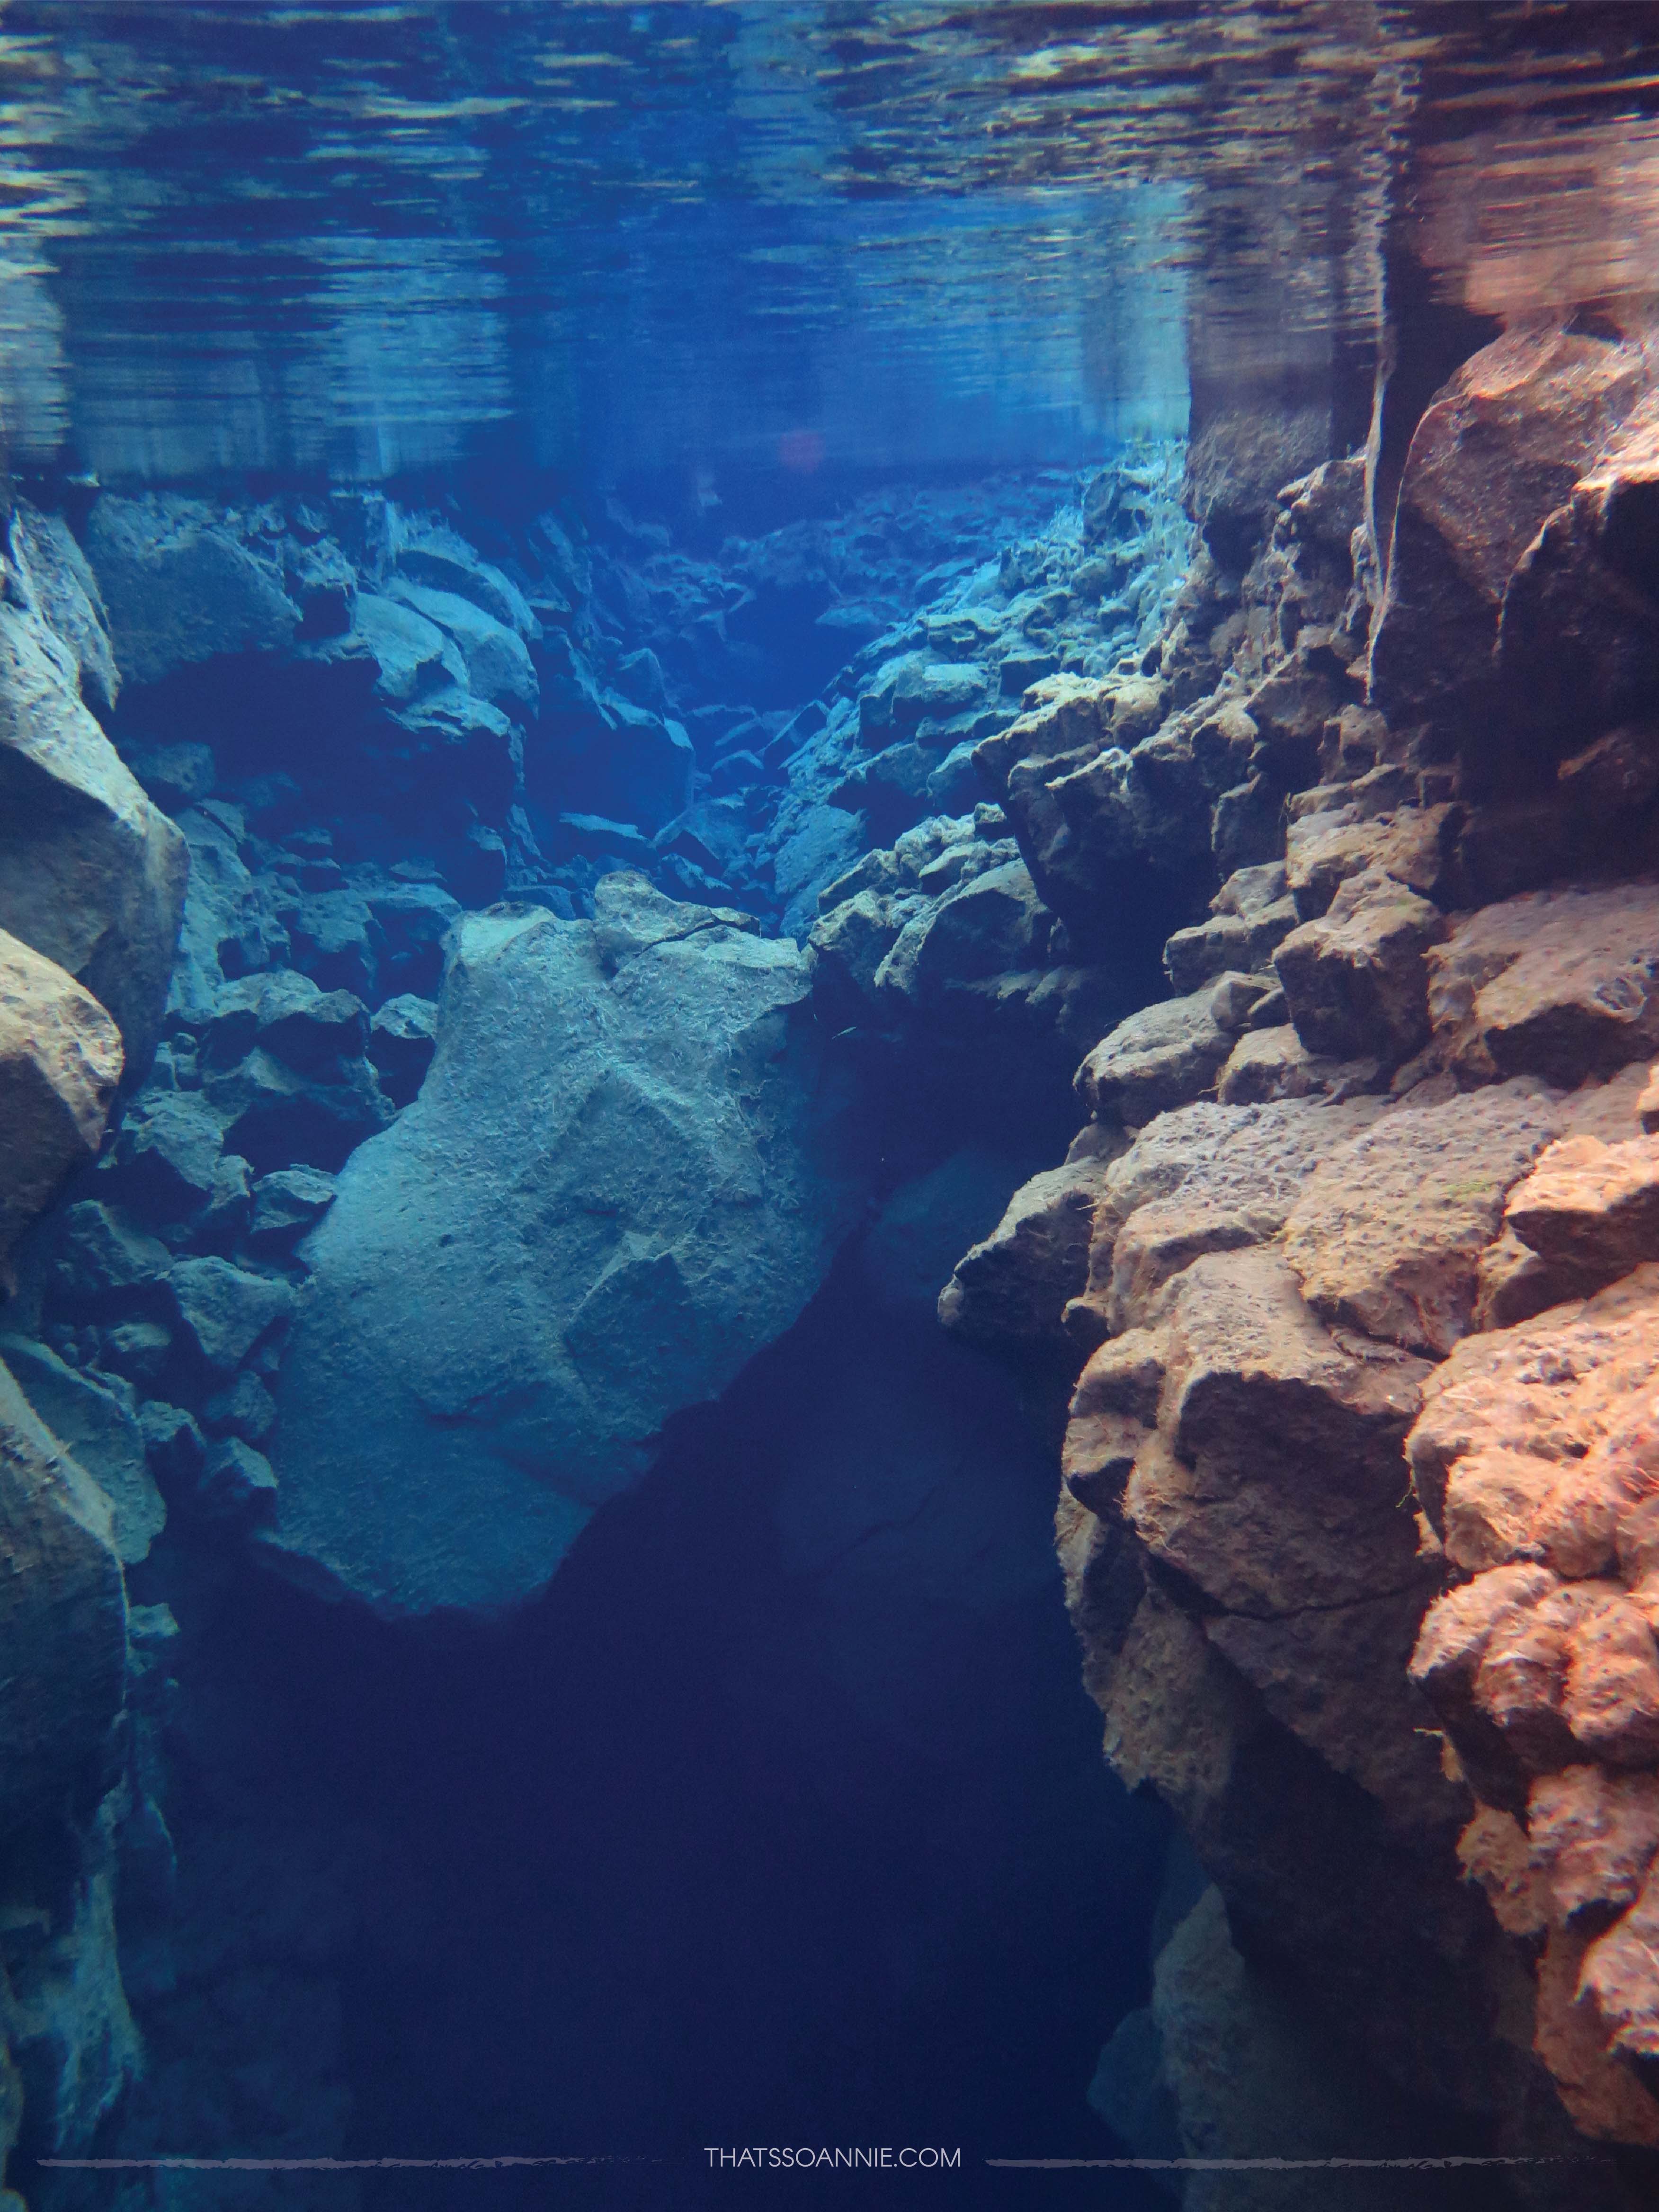 Snorkeling between American and Eurasian Tectonic Plates at Big Crack, Silfra Fissure, Iceland | www.thatssoannie.com